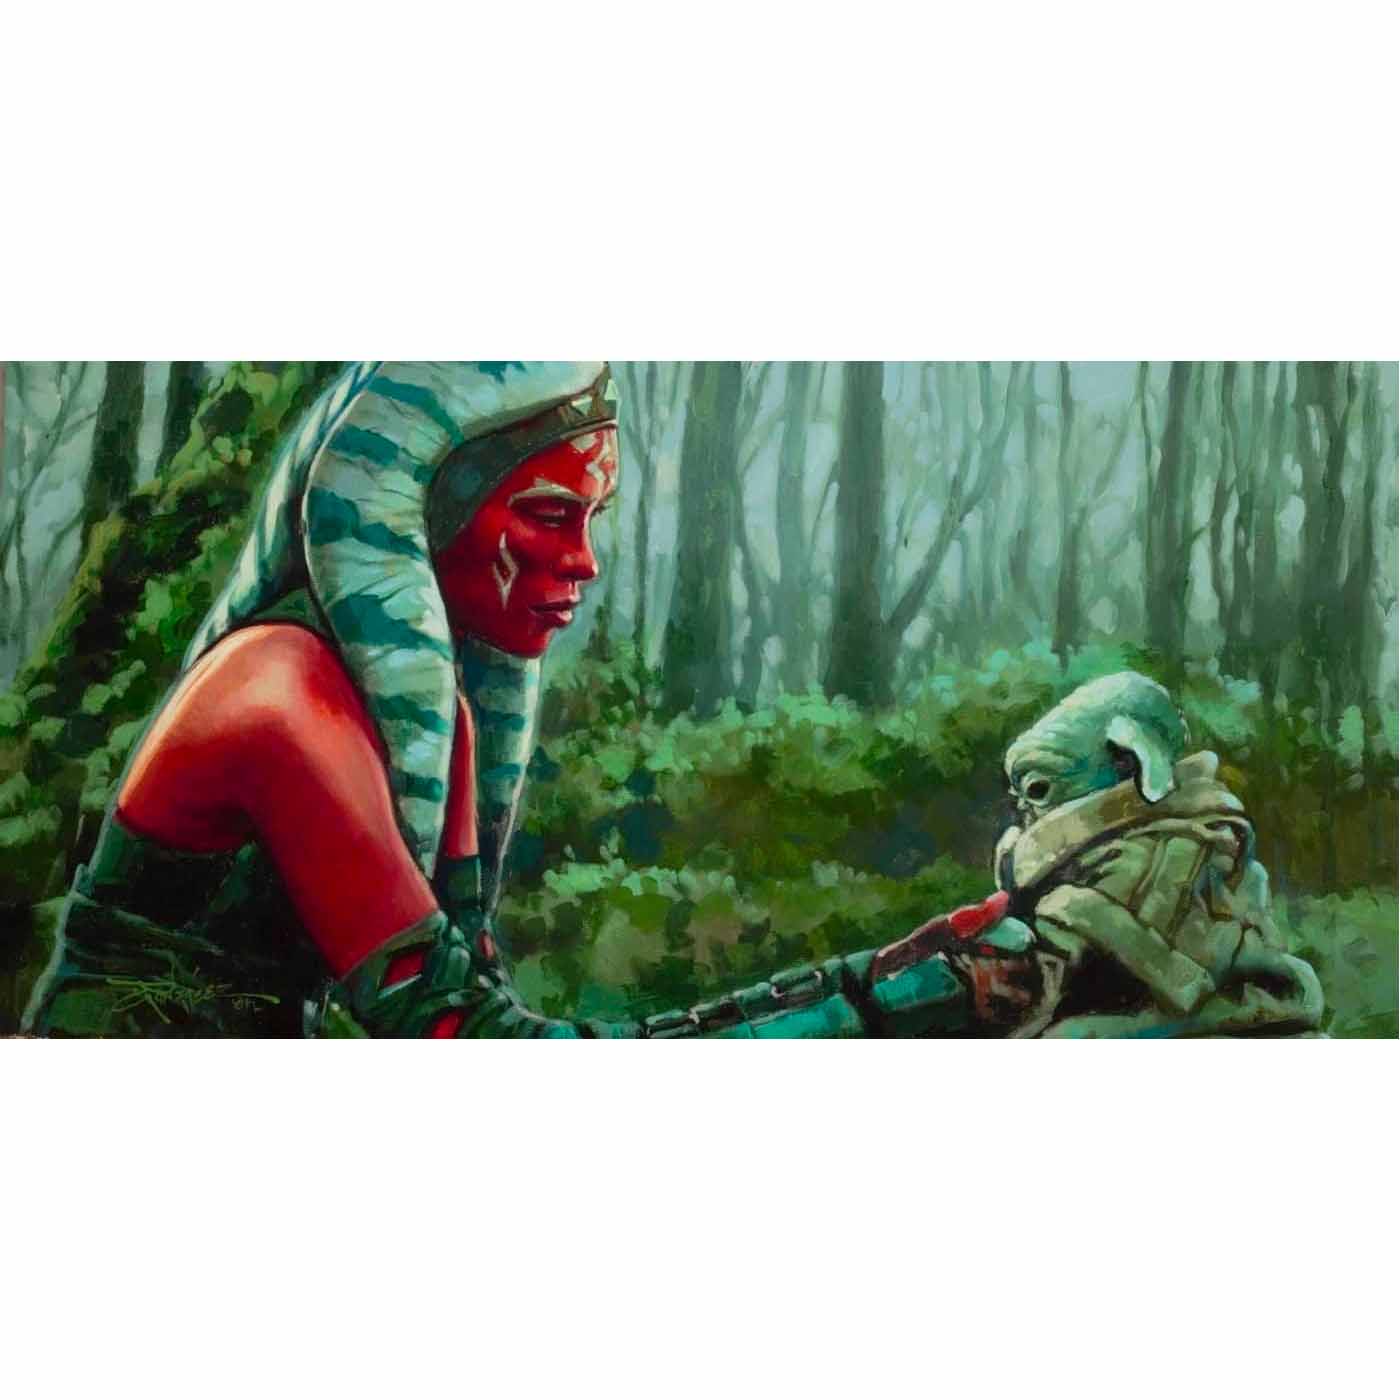 Rodel Gonzalez Star Wars "Sense Much Fear in You" Limited Edition Canvas Giclee